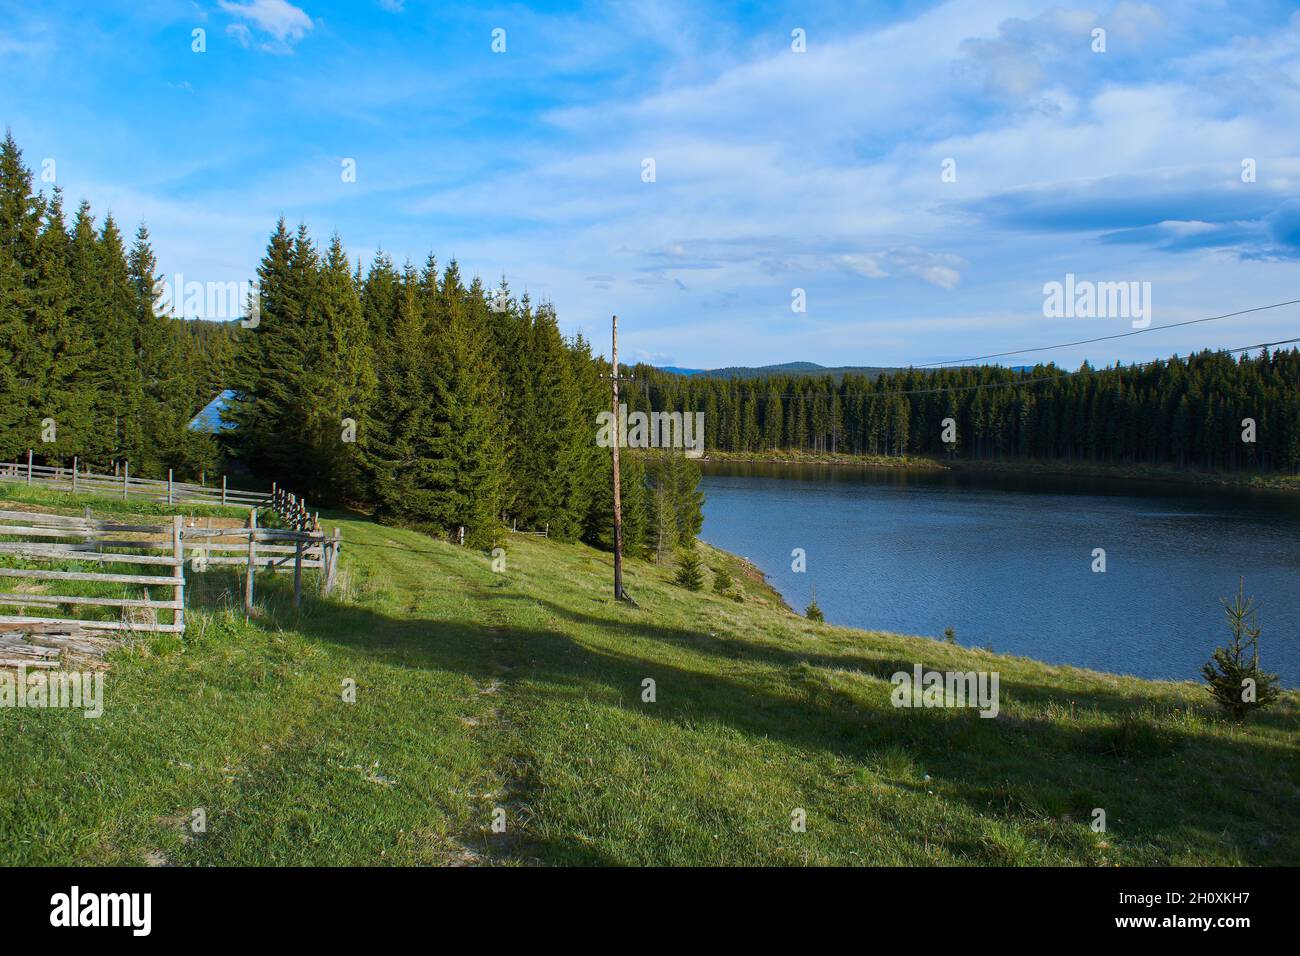 A view over the Lake Oasa in Mountains Sureanu with sky with clouds and forest Stock Photo